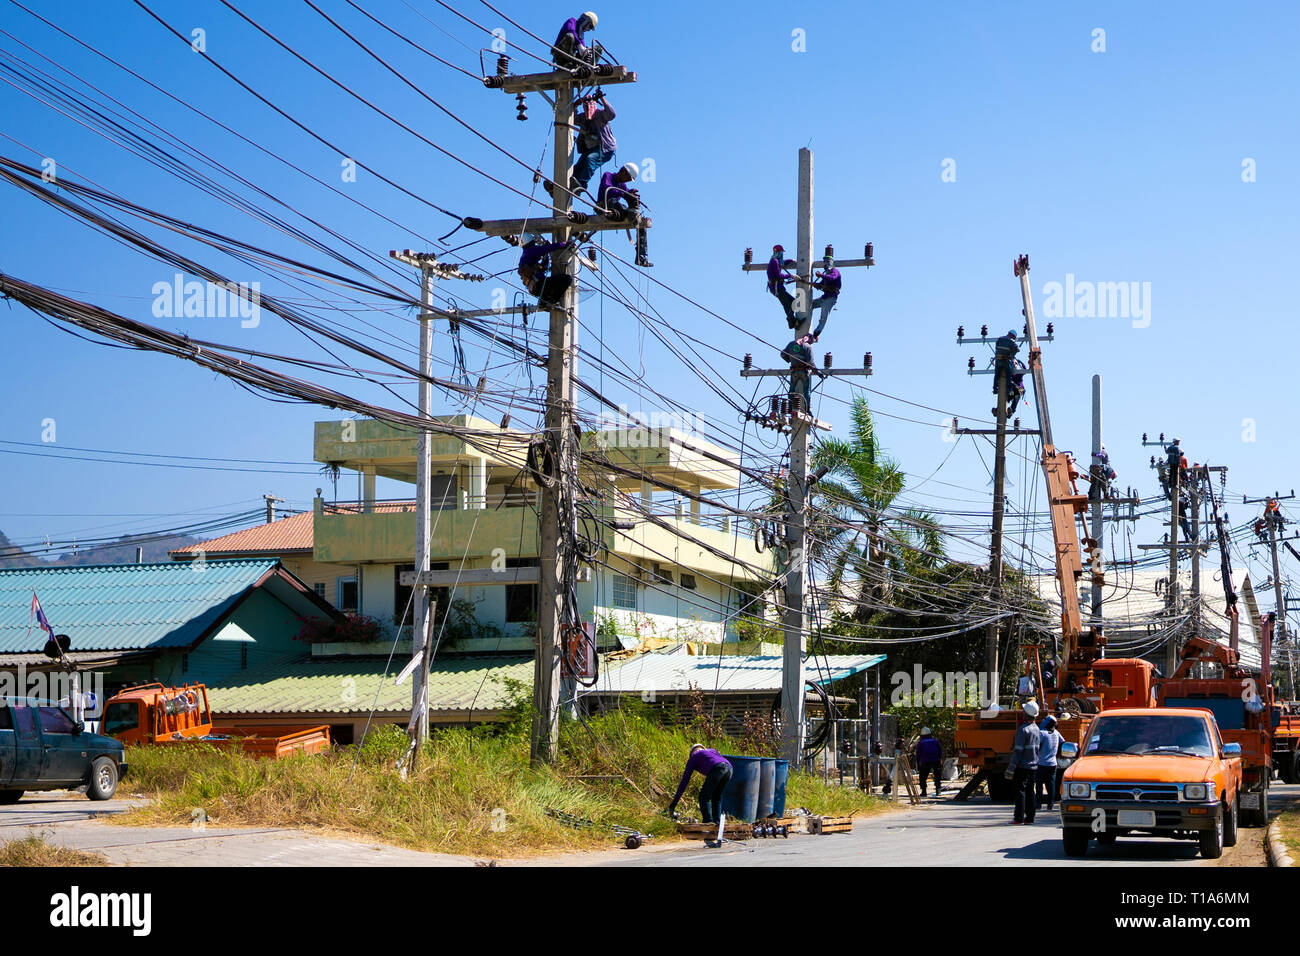 Electricians working on a power pole, filled with complex communication lines.  Stock Photo